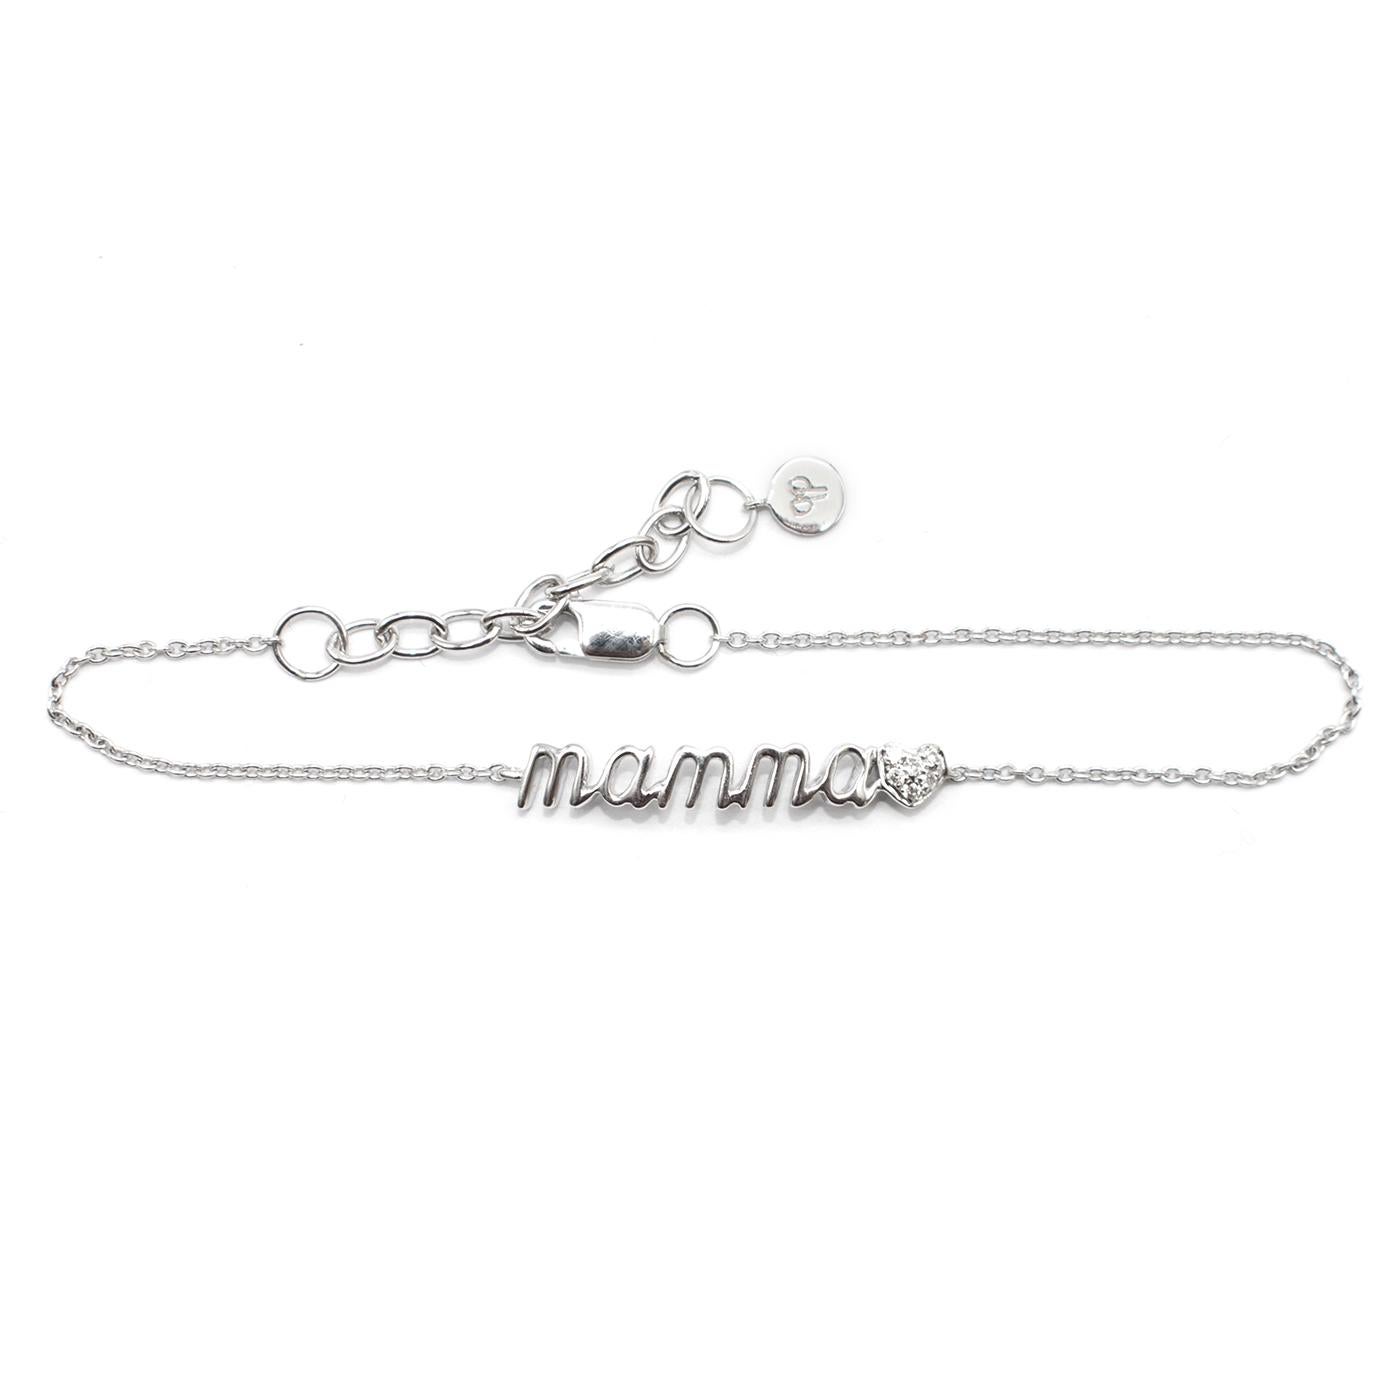 Pia Hallstrom 'Mama' 0.3ct Diamond-Embellished 18k White-Gold Bracelet

- Top quality, 18k white-gold
- Fine chain 
- 'mama' feature, 0.3ct white diamond embellished heart 
- Adjustable lobster clasp fastening, logo-engraved charm 
- Brand new and